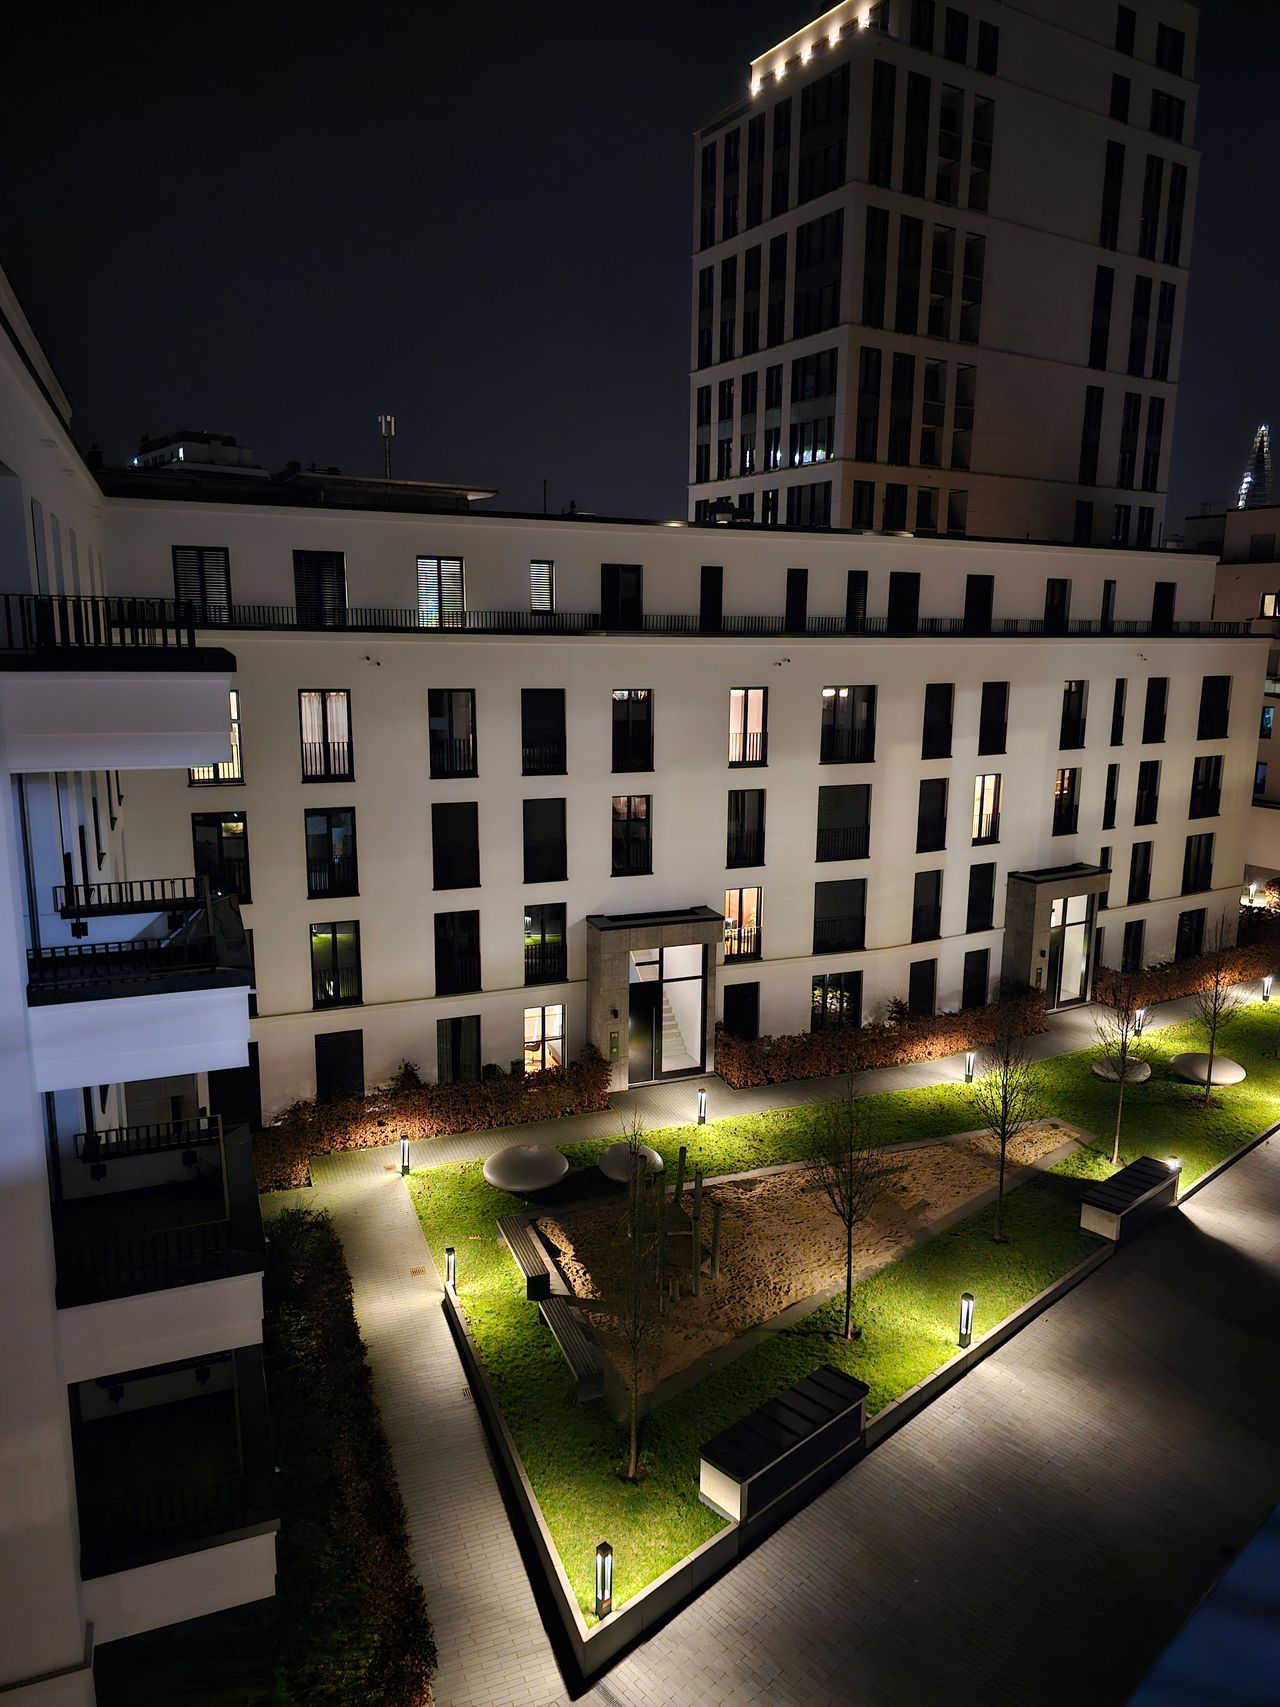 2 bedrooms, 2 bathrooms, 1 living room, furnished new apartment in the center of Düsseldorf